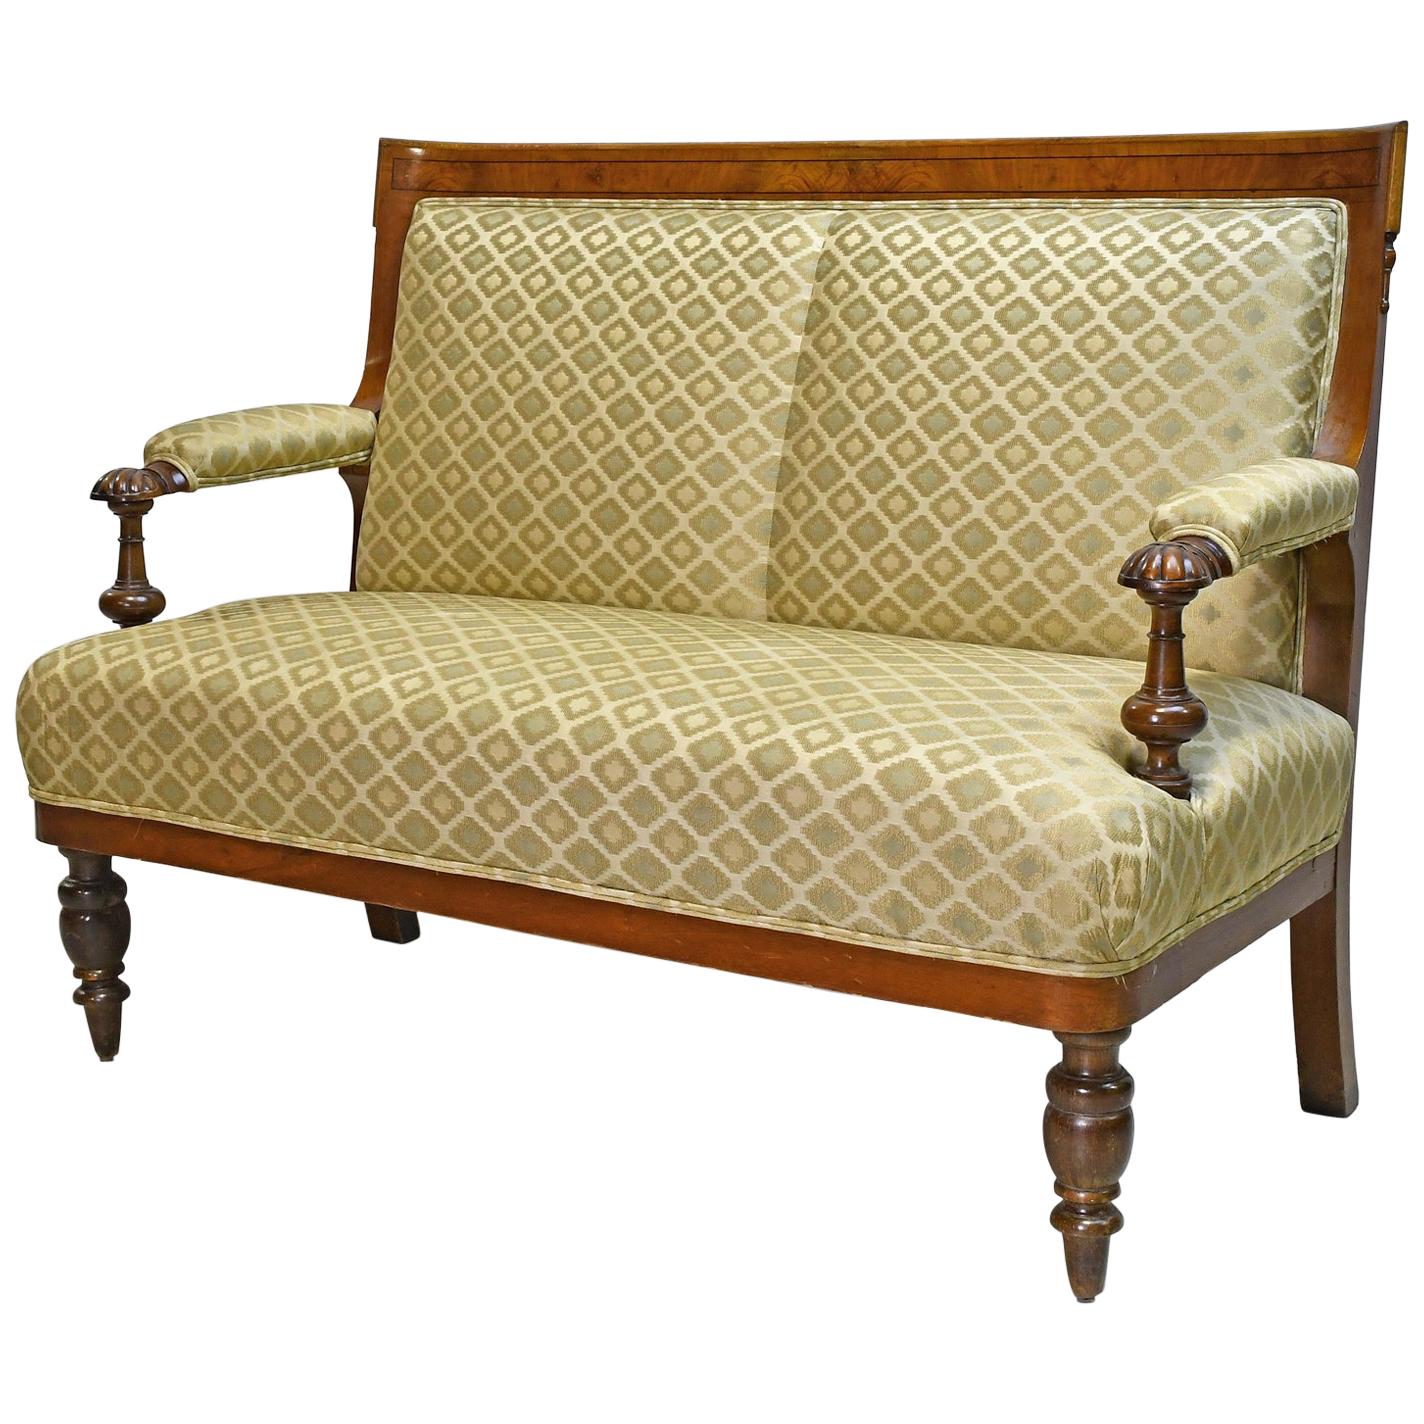 A small and comfortable canapé or settee in figured walnut with ebonized inlaid banding. Legs are turned out of beechwood and stained. Offers upholstered arm rests, back and seat, with eight-way, hand-tied springs that have been pulled tight &